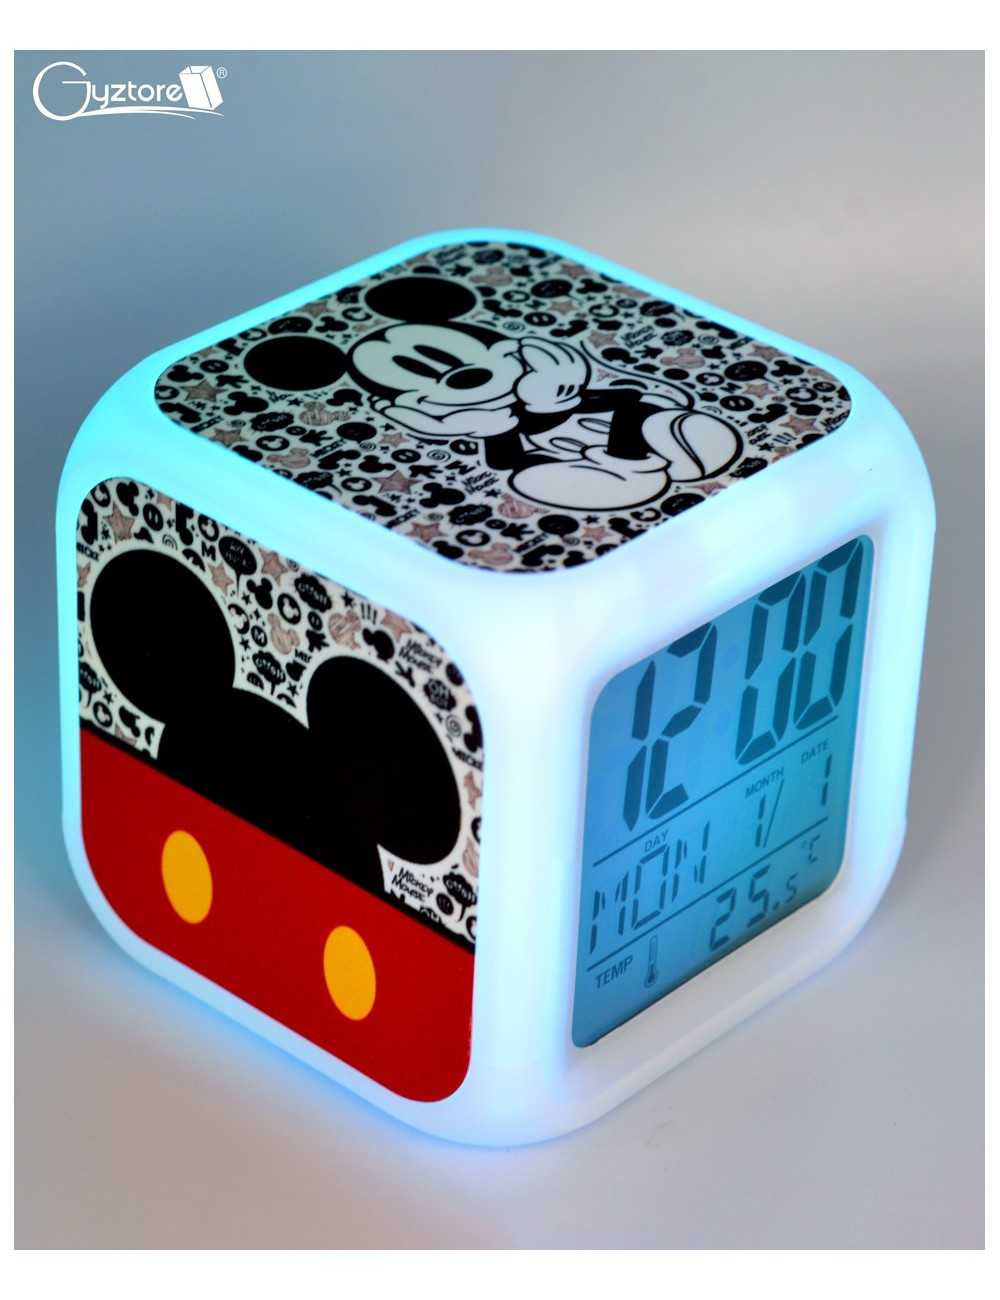 Relojes digitales “Mickey Mouse” con LED multicolor